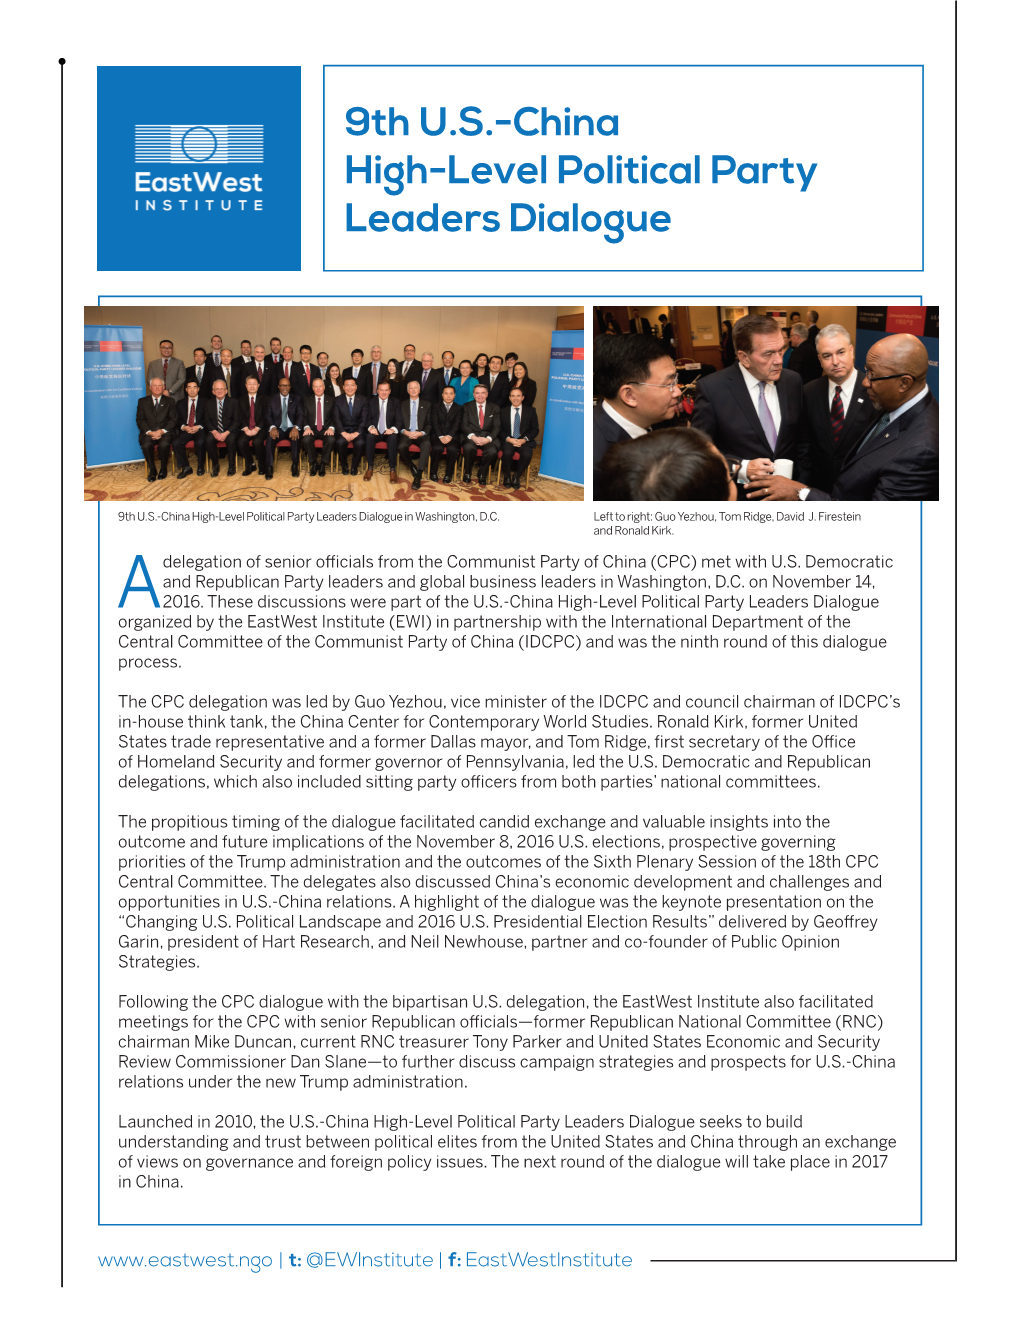 9Th U.S.-China High-Level Political Party Leaders Dialogue